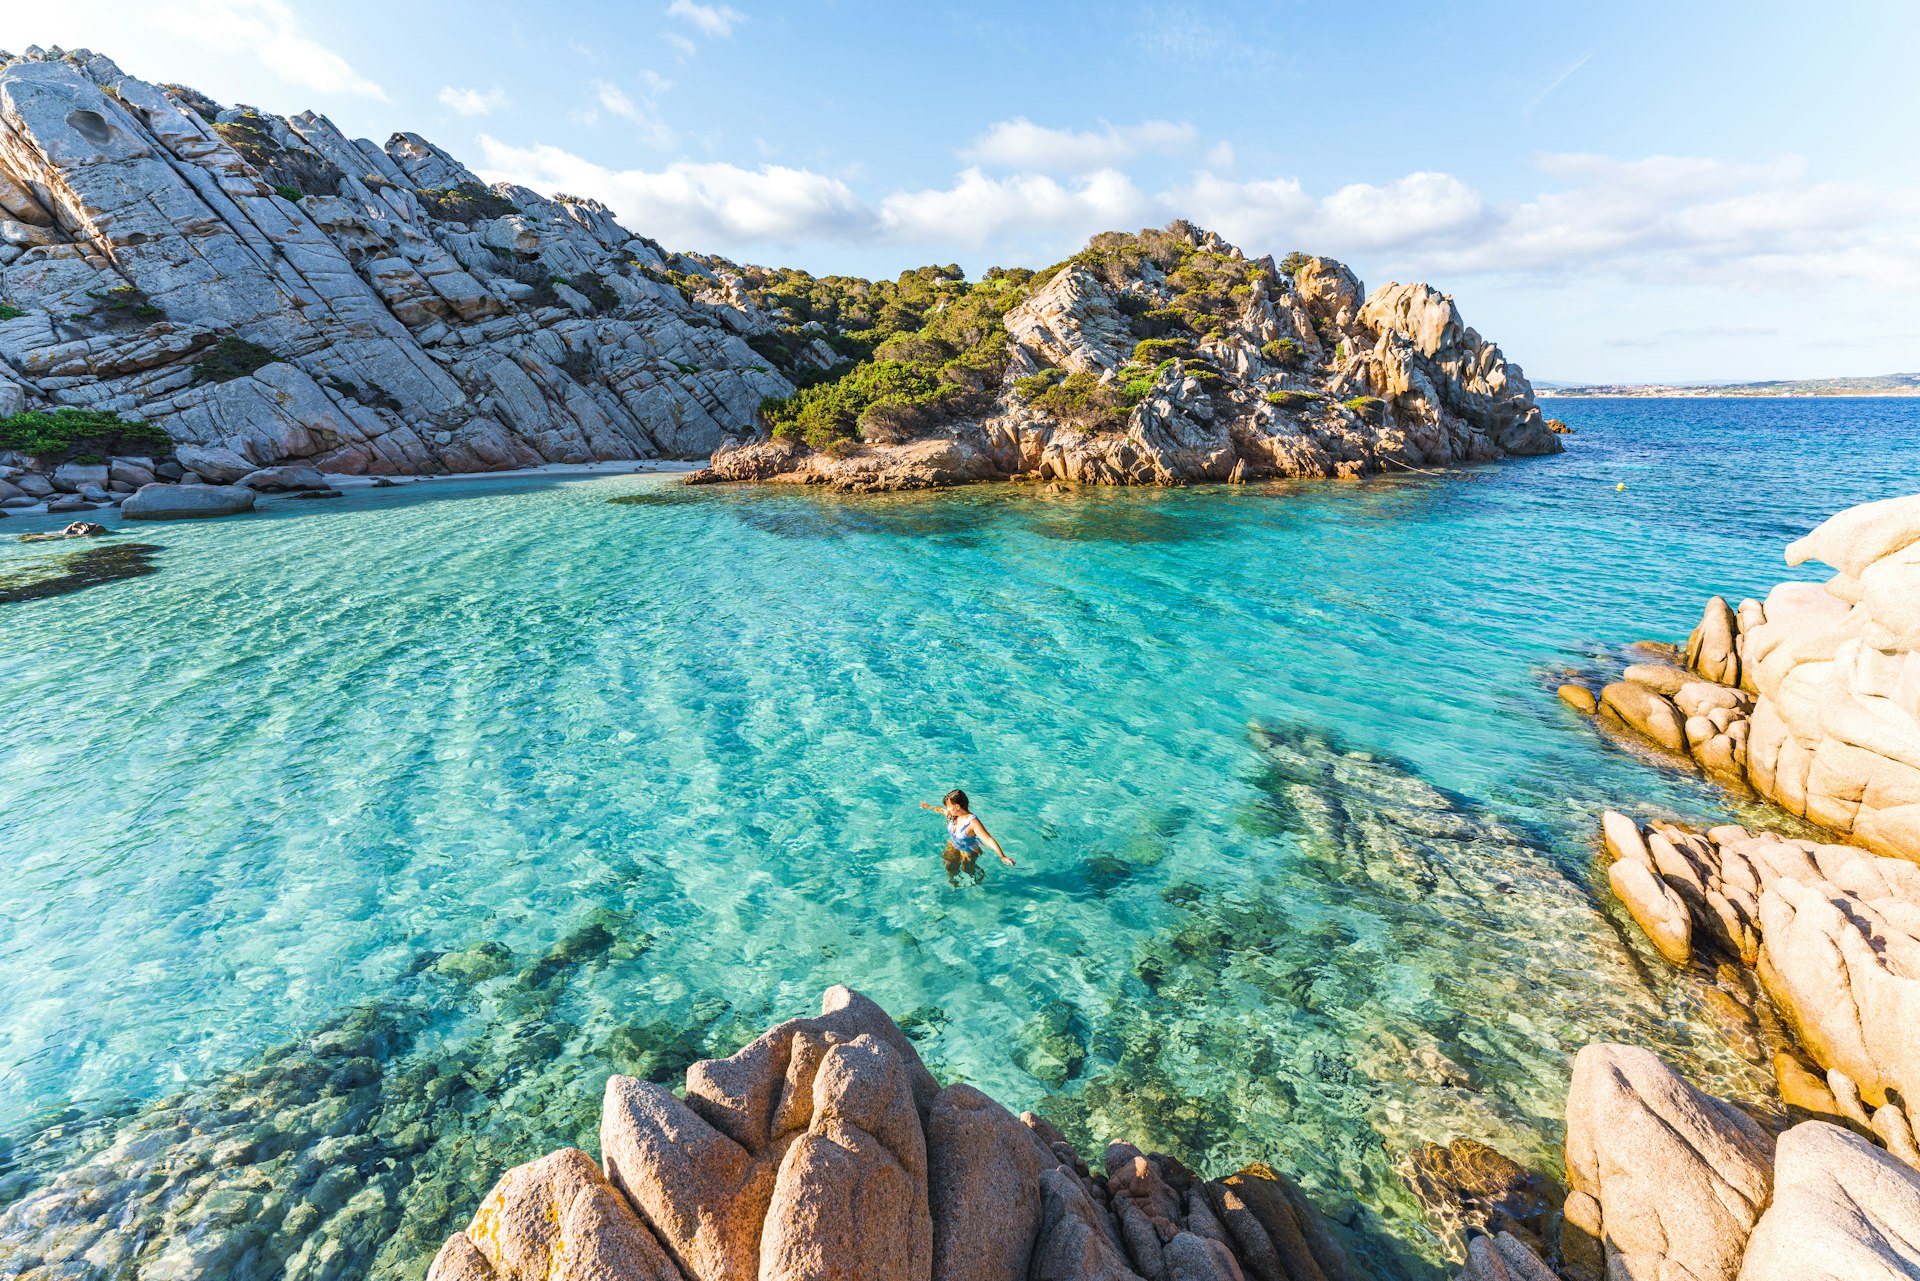 A child swims in a turquoise bay on a sunny day